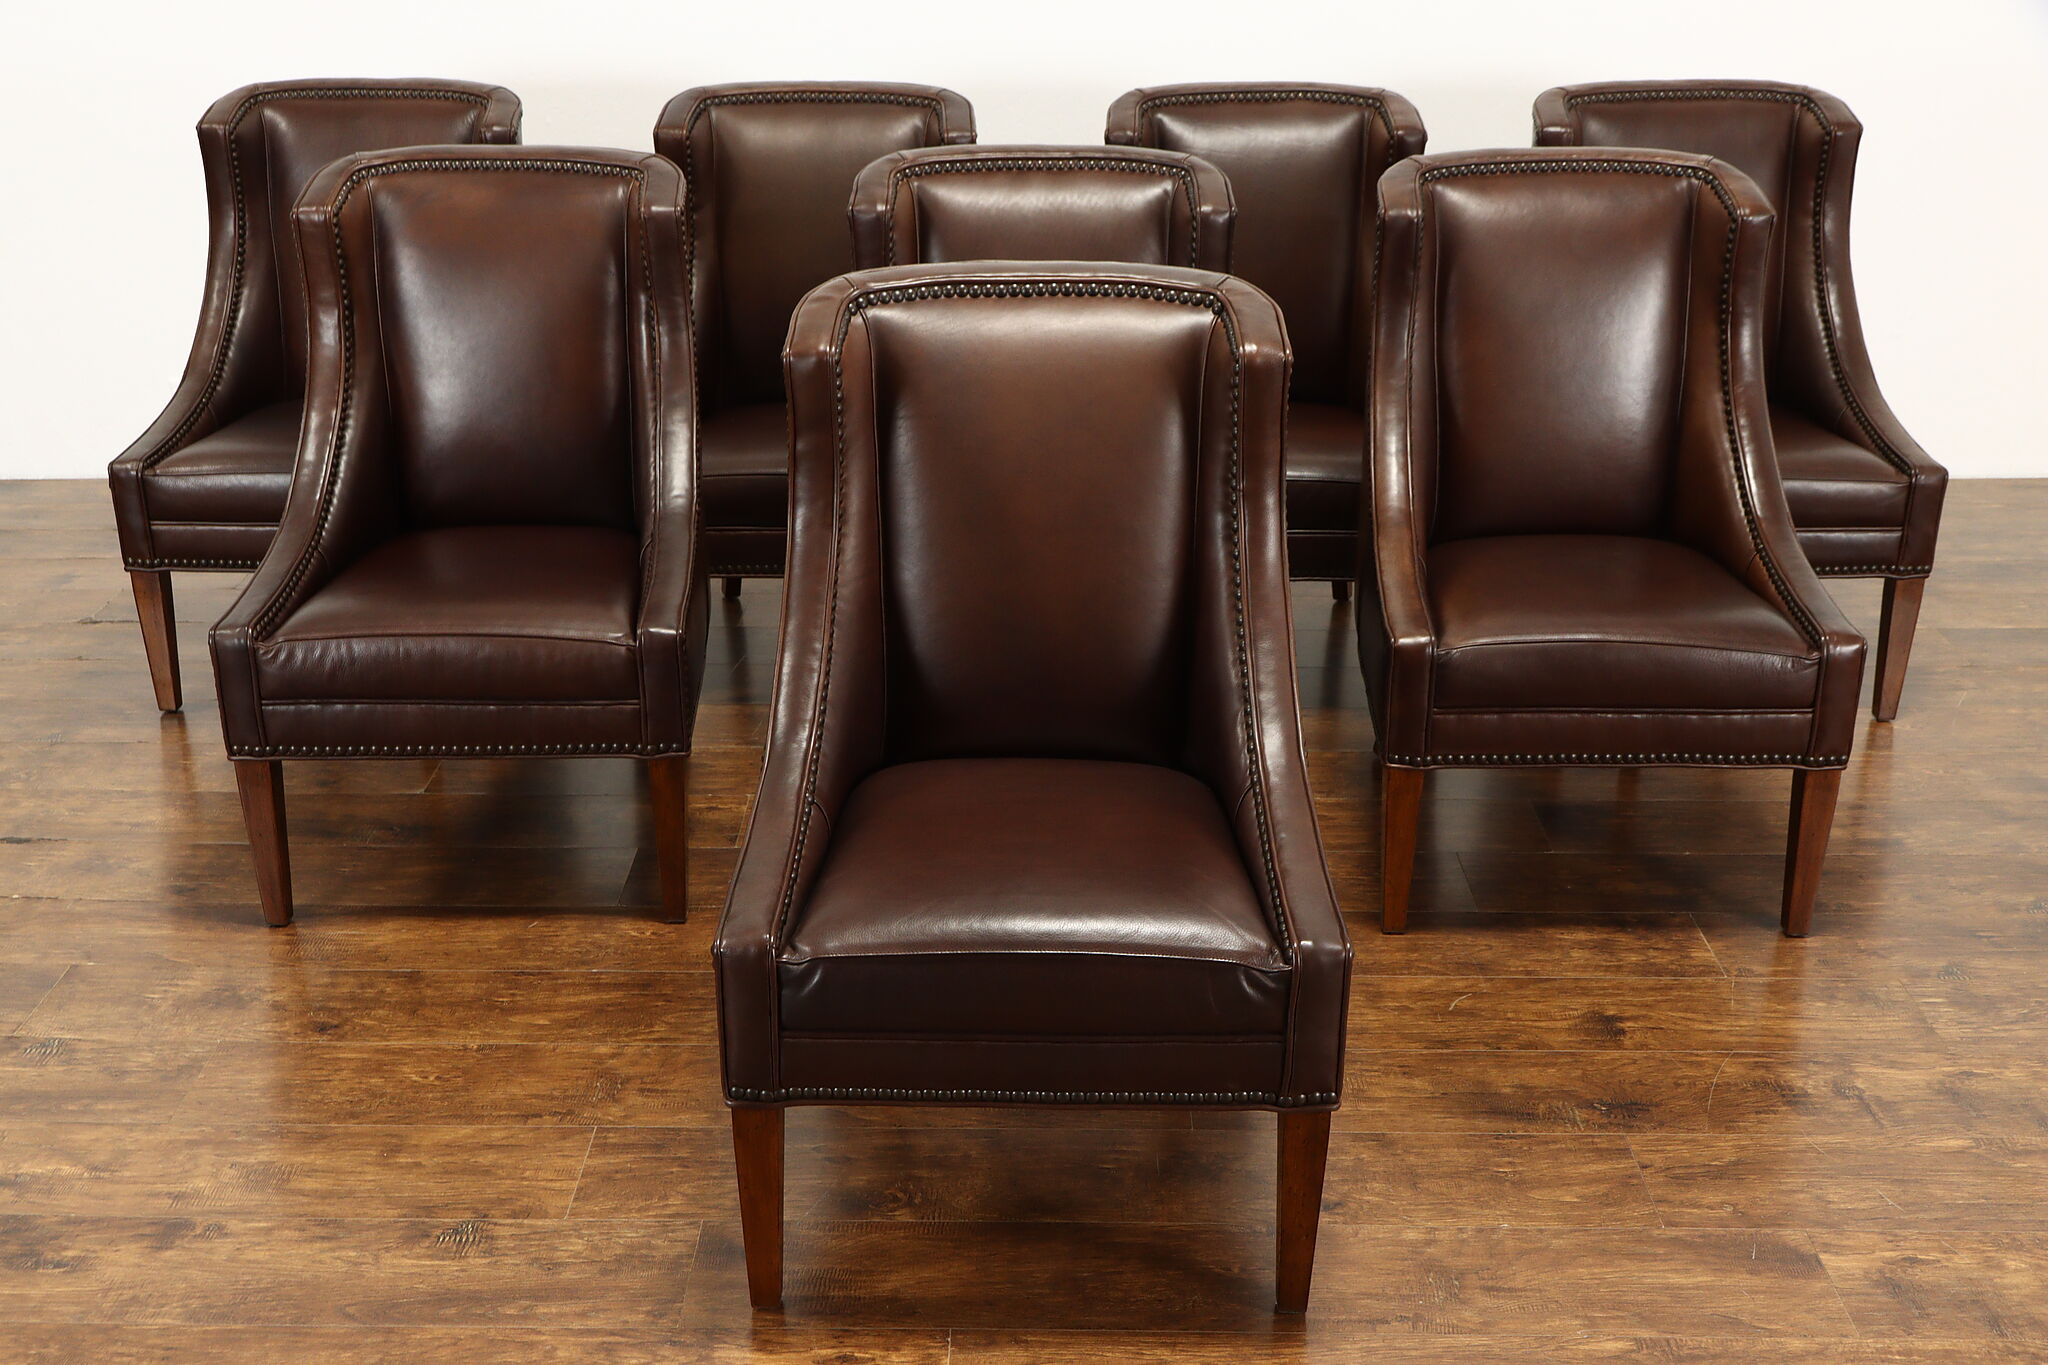 Leather Dining Room Chairs With Nailhead Trim